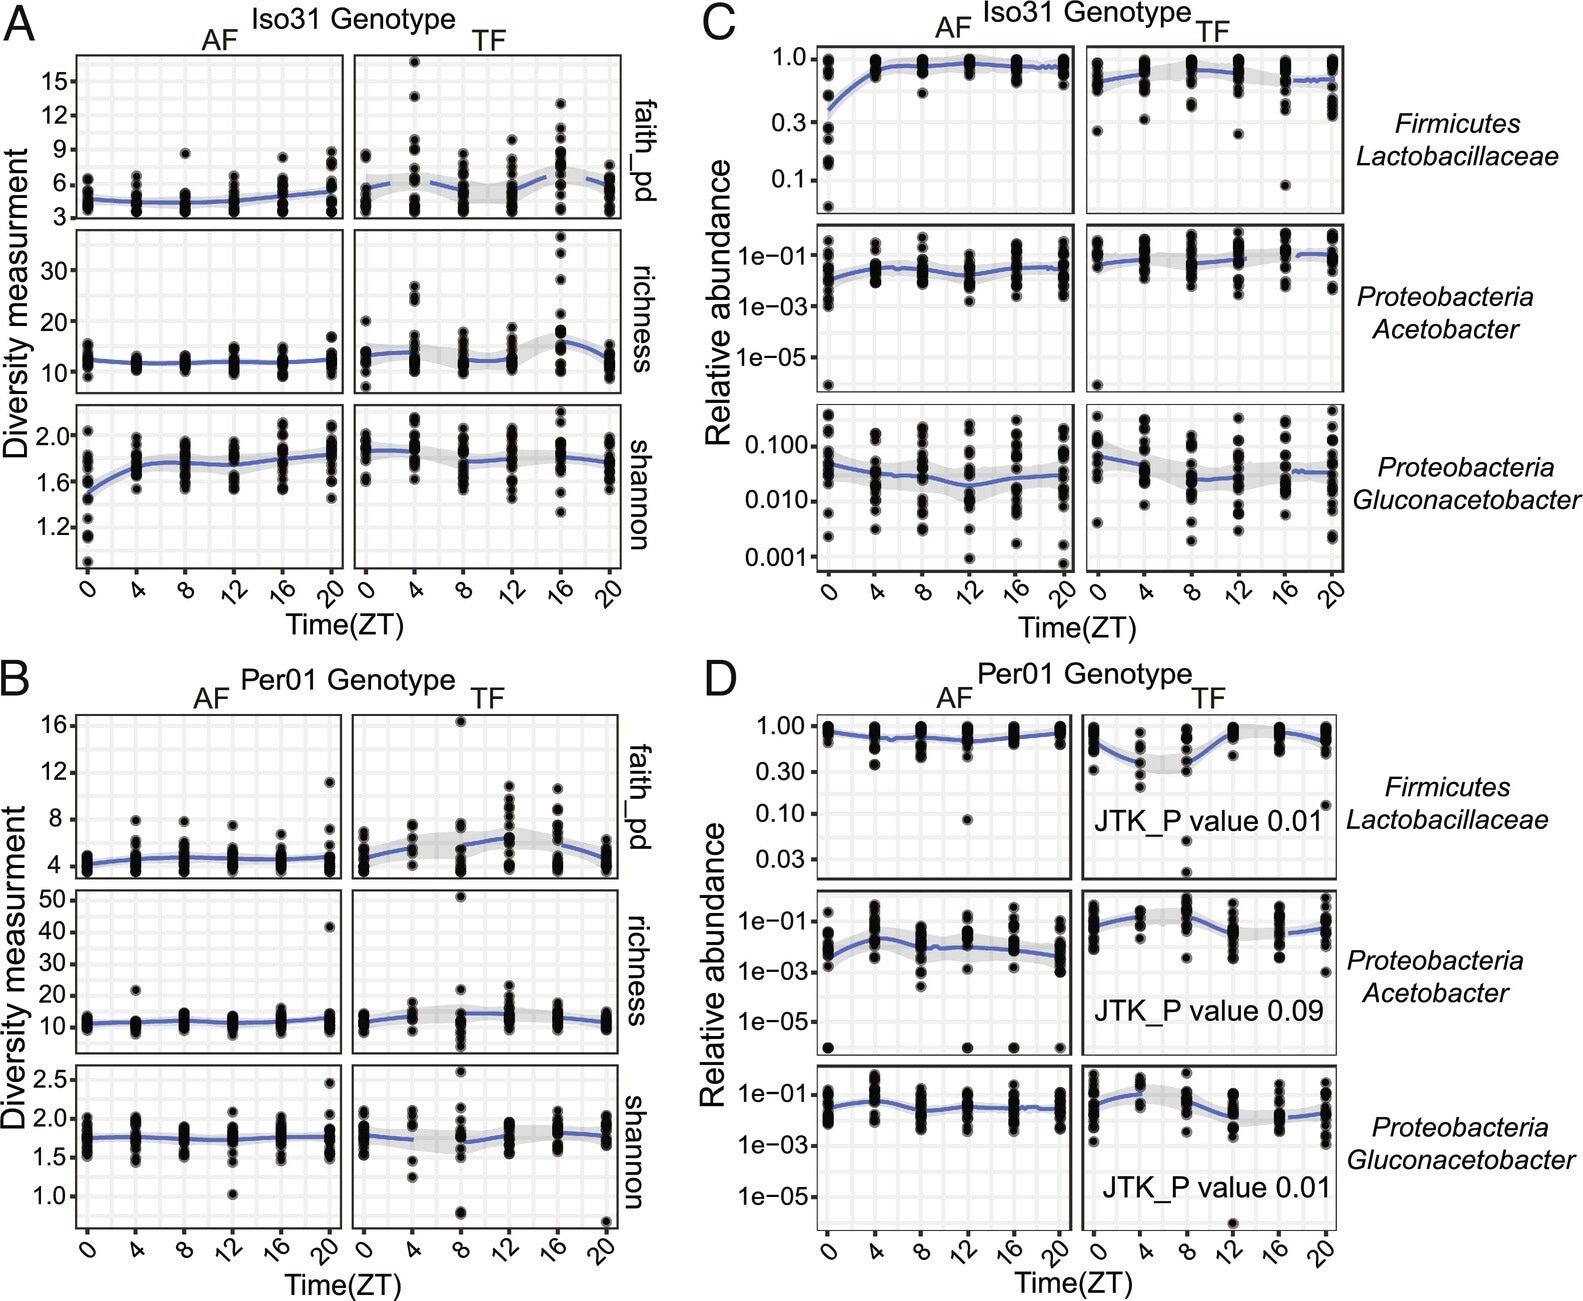 The Drosophila intestinal microbiome is largely stable over a daily cycle. (A and B) Microbiome diversity does not show diurnal oscillations in wild type Iso31 or clock mutant per01 fly guts under ad−lib (AF) or TF conditions. JTK_cycle was used to assess rhythmicity. (C and D) Specific bacterial species cycle under TF conditions, but only in per01. JTK_cycle values are shown.